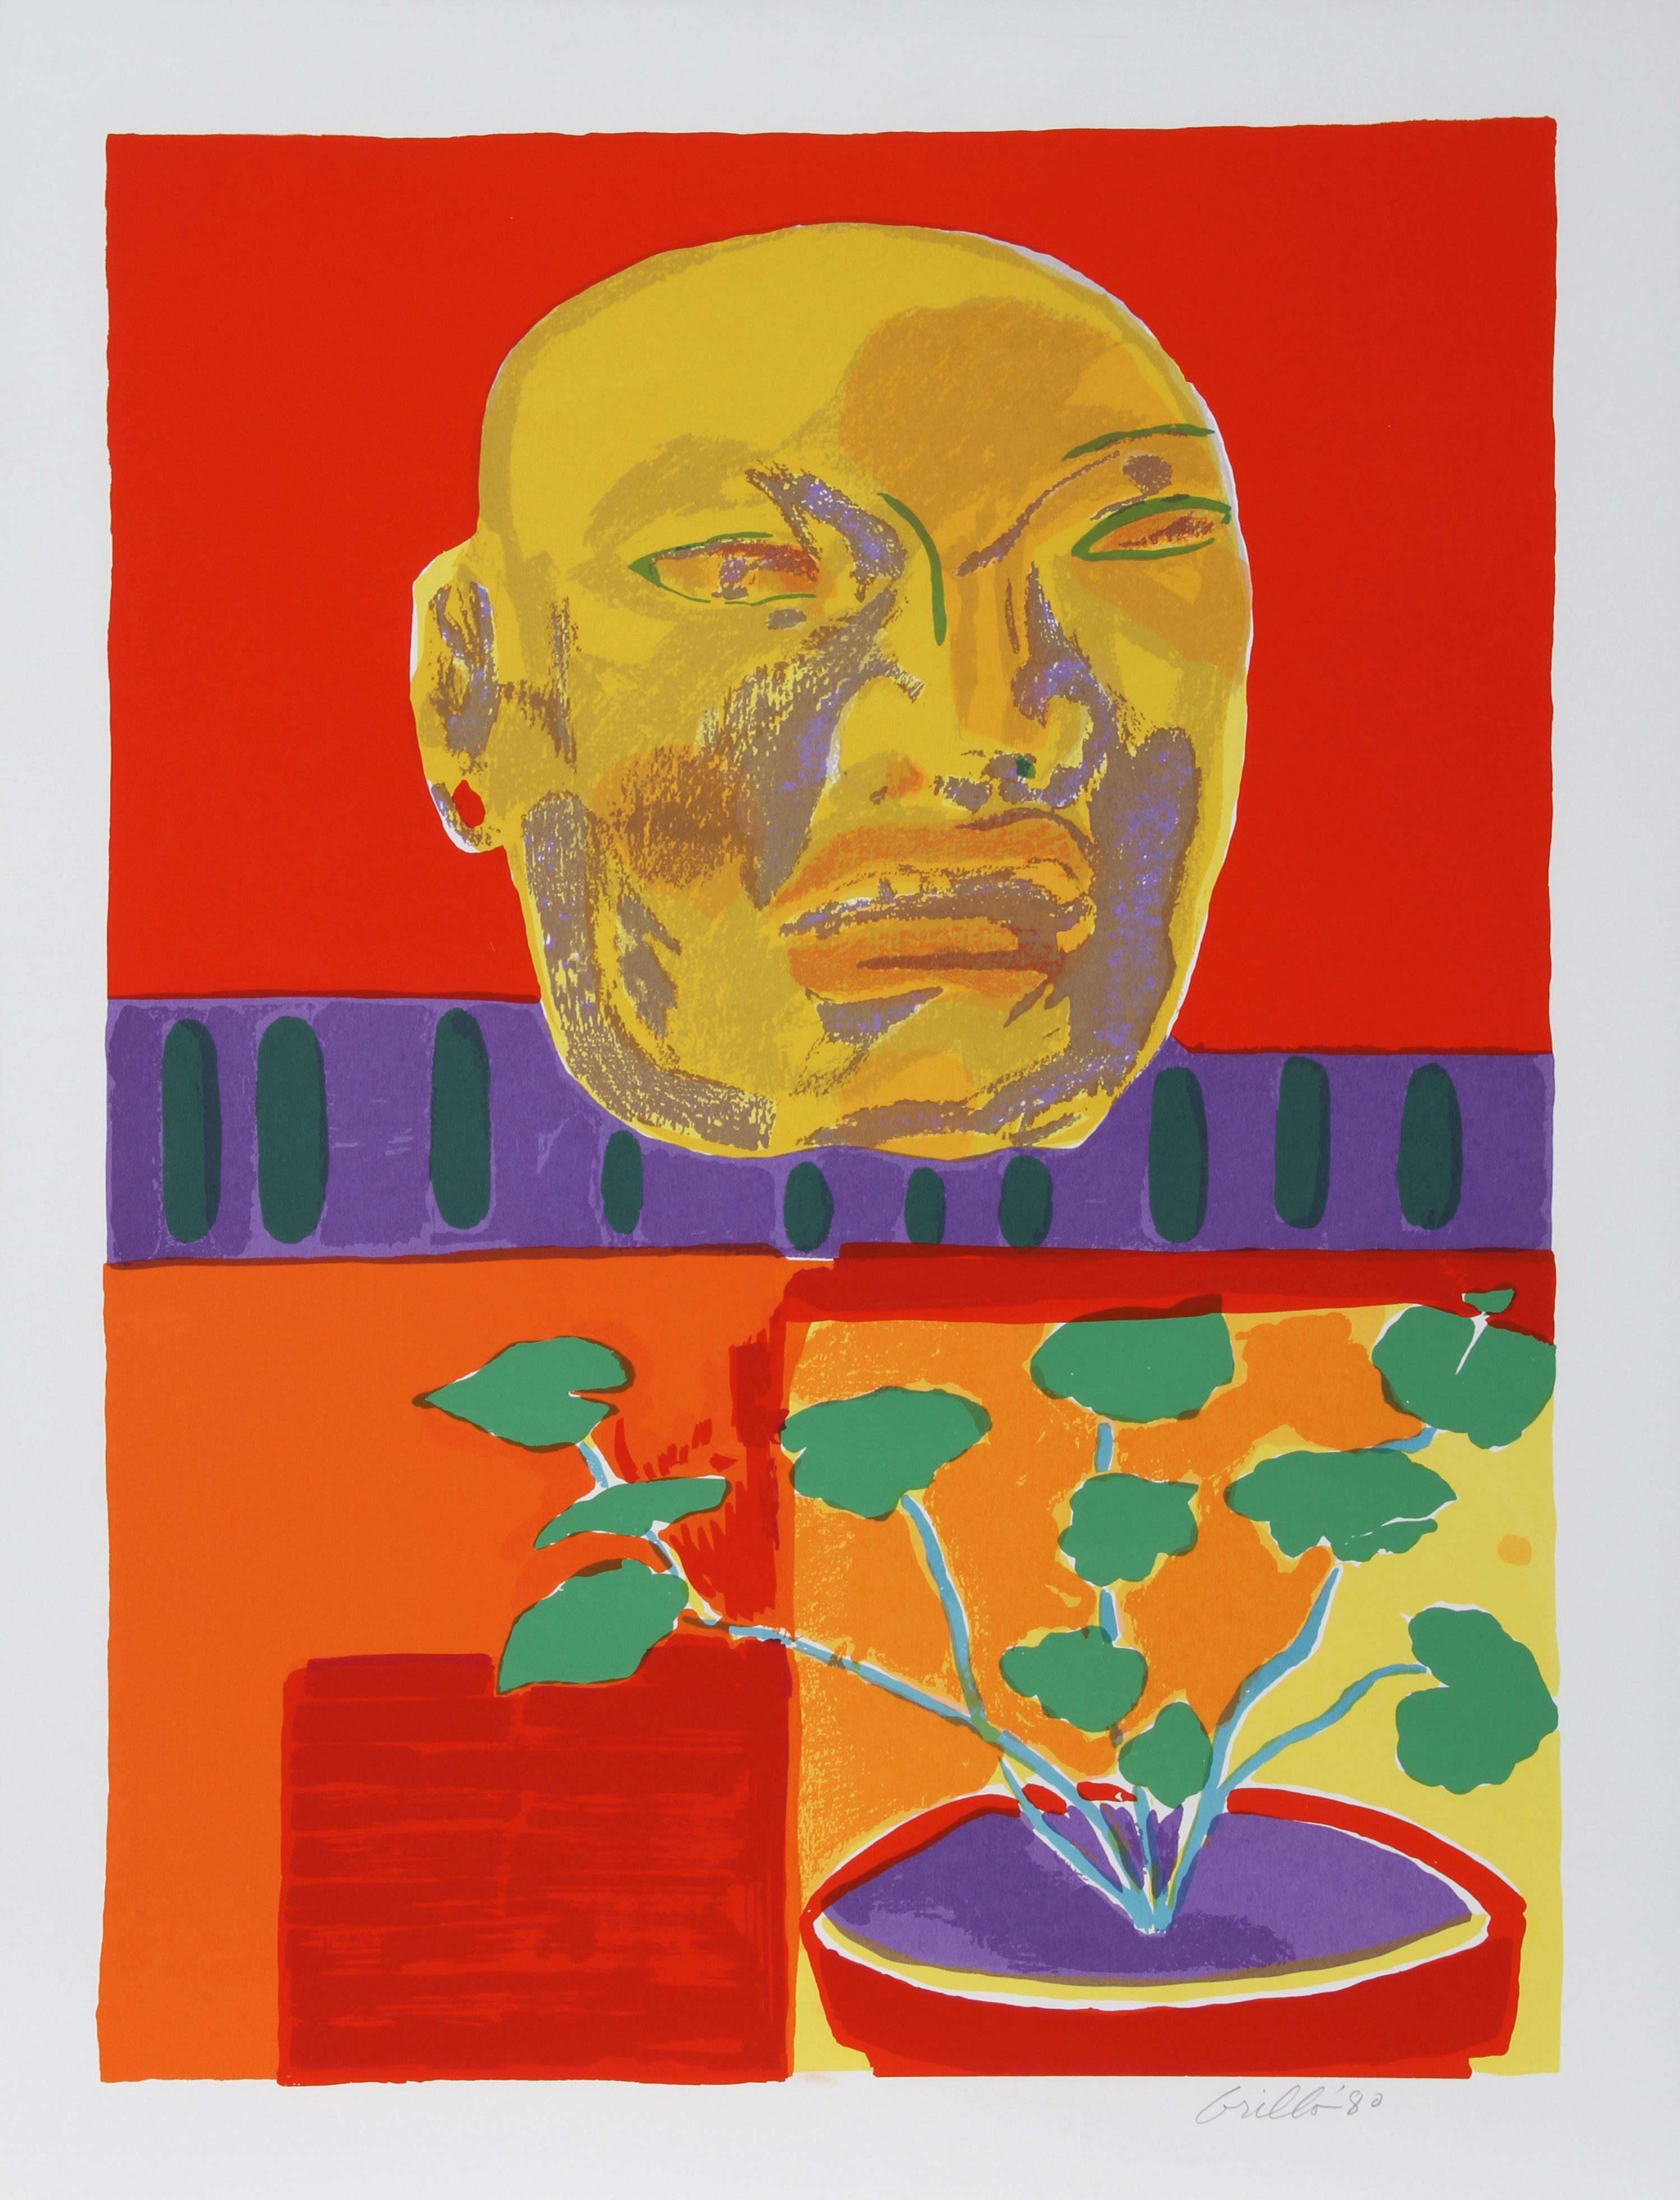 Artist:  John Grillo, American (1917 - 2014)
Title:  Olmec Mask
Year:  1980
Medium:  Serigraph, signed and numbered in pencil
Edition:  200, AP 30
Image Size:  30 x 22.5 inches
Size:  34 in. x 26 in. (86.36 cm x 66.04 cm)